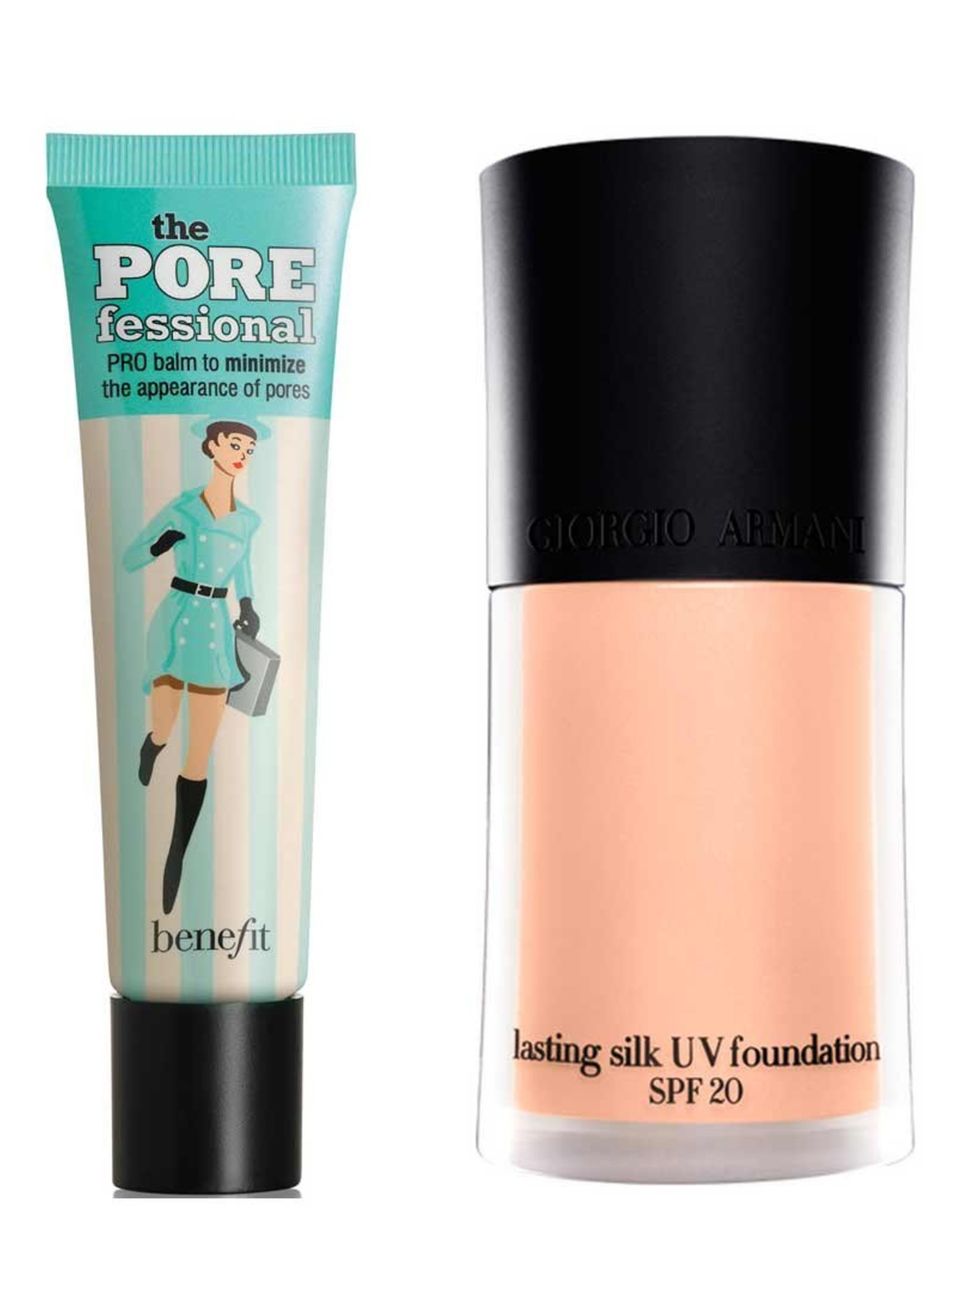 &lt;p&gt;Start with your base, you want a creamy velveteen complexion. ELLE loves &lt;a href=&quot;http://www.elleuk.com/beauty/news/free!-benefit-porefessionals-primer-with-june-elle-magazine-free-beauty-products&quot;&gt;Benefit Porefessional Primer, fr